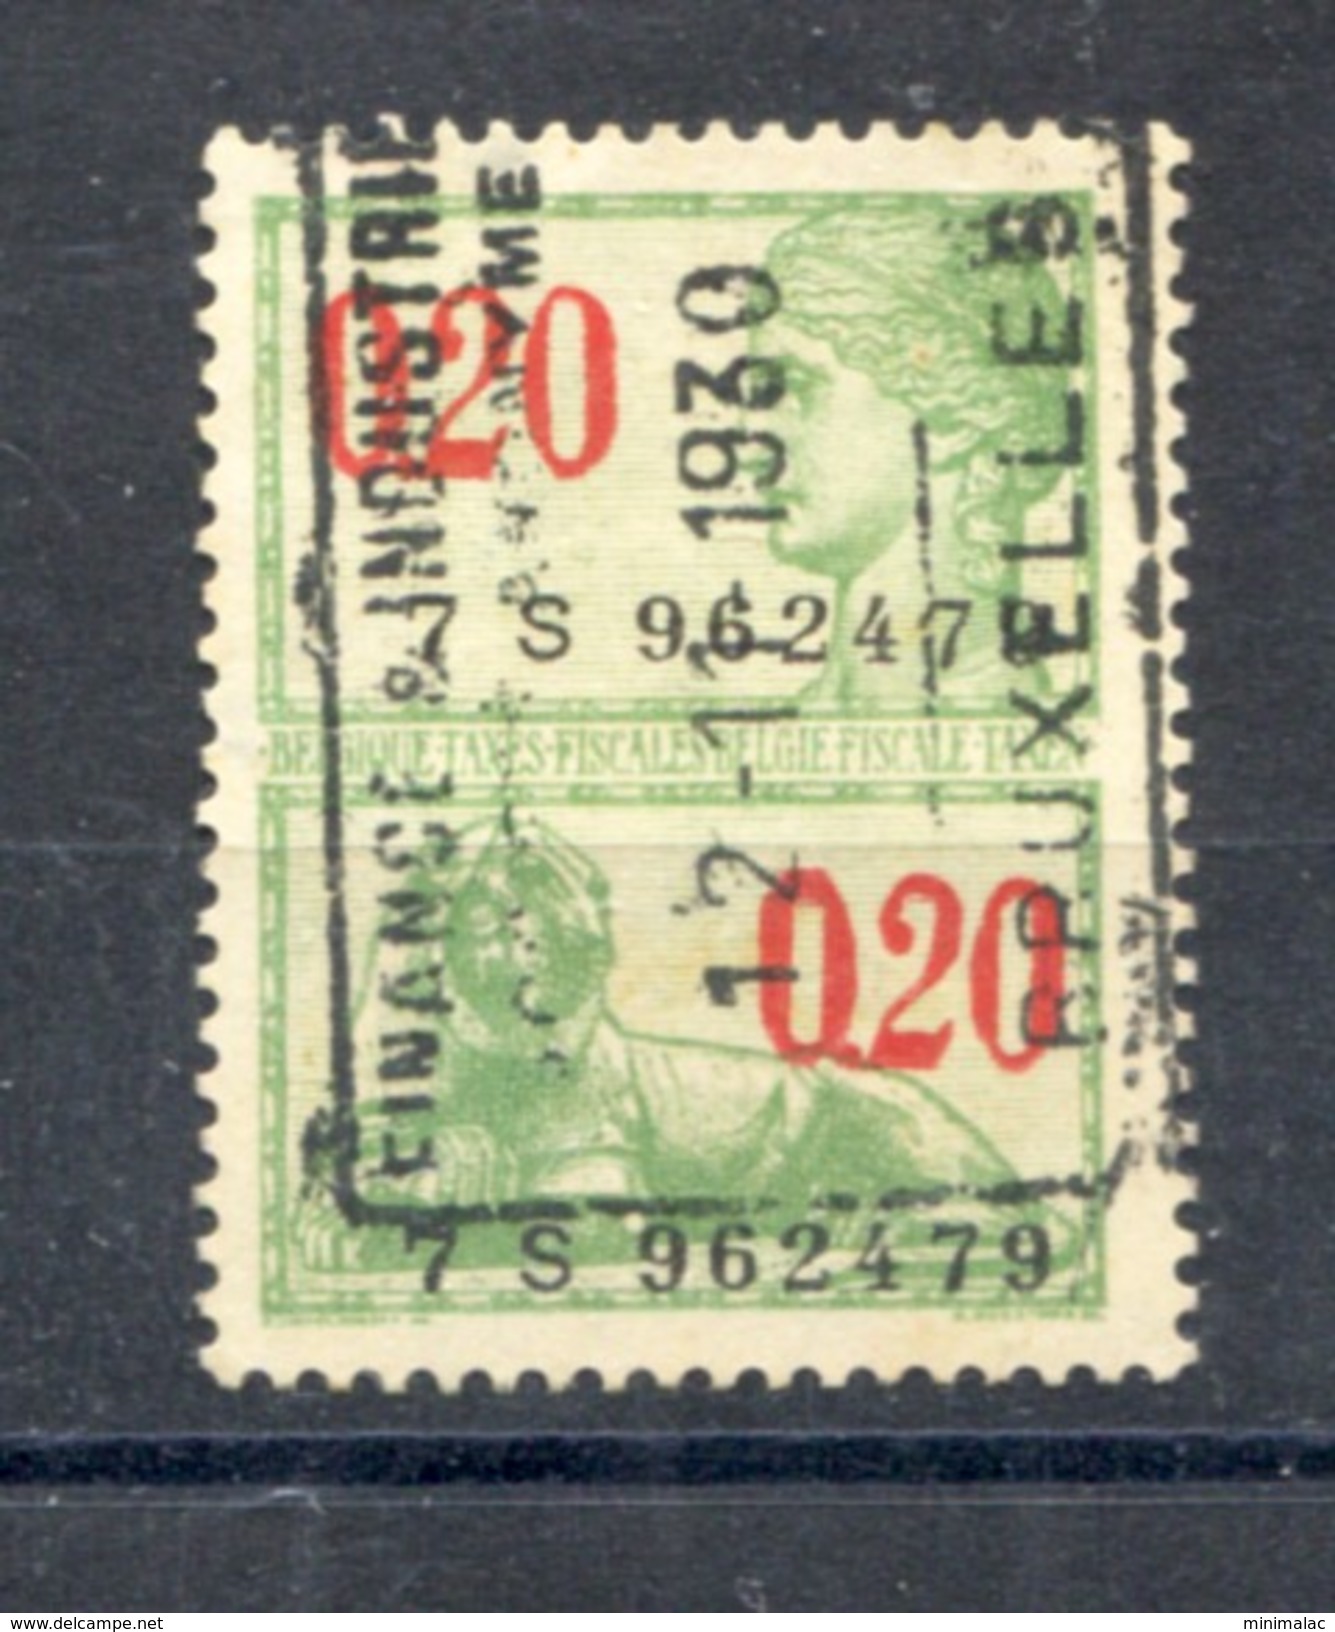 Belgium 1930 Archaeology Egypt, Taxes Fiscales Timbre Revenue Fiscal Tax Postage Due Official  Belgique 0.20 - Stamps